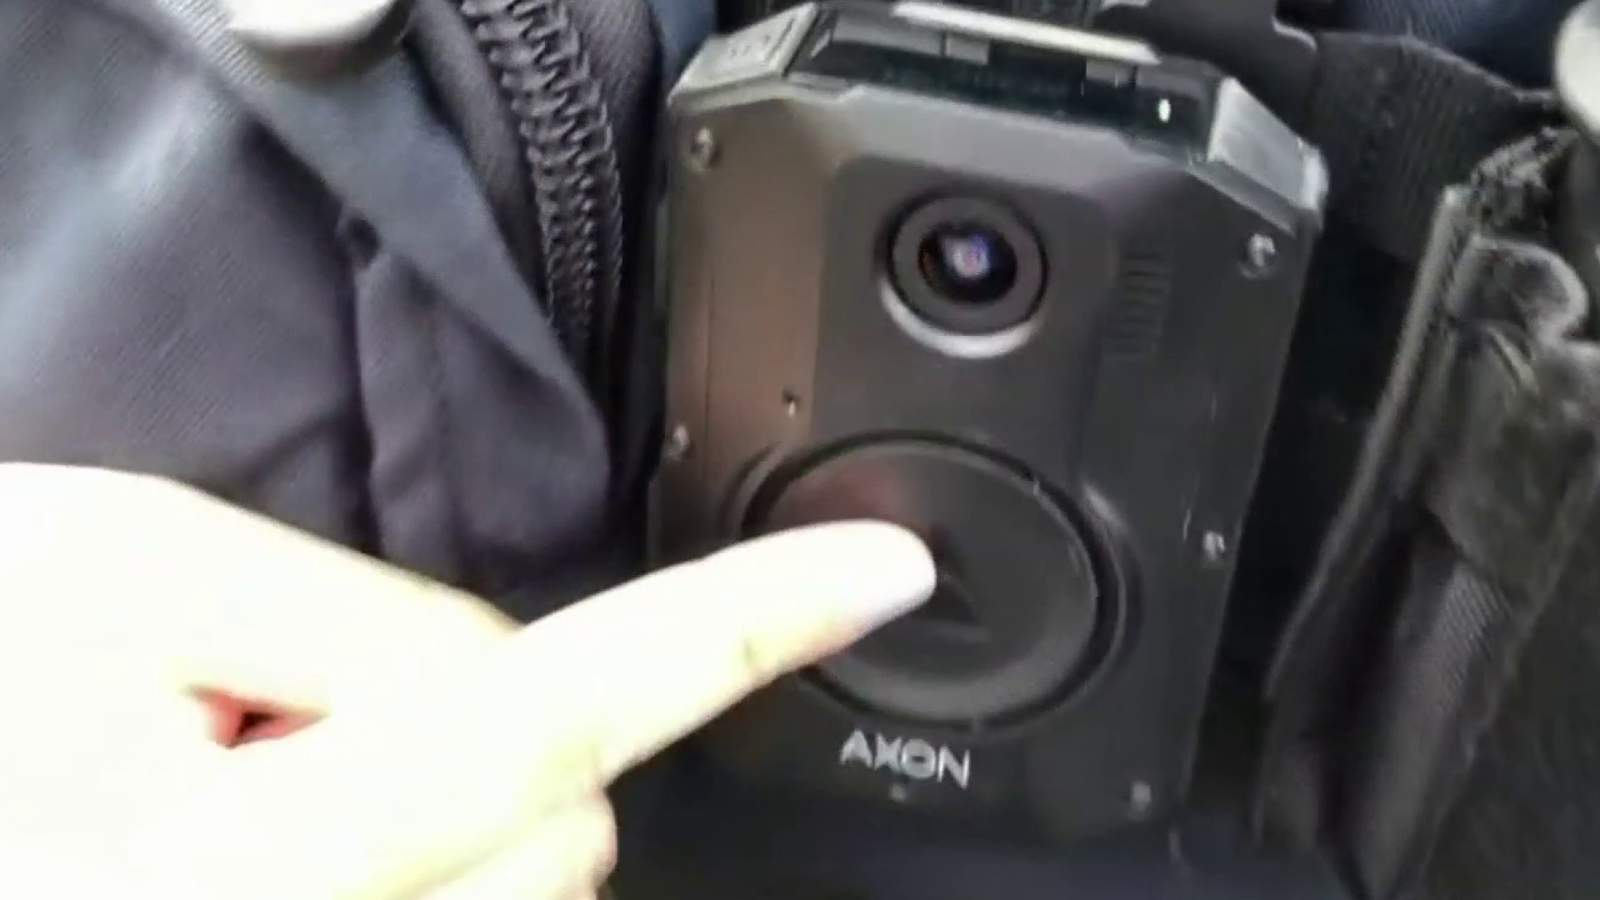 Committee recommends school resource officers in Osceola County wear body cameras